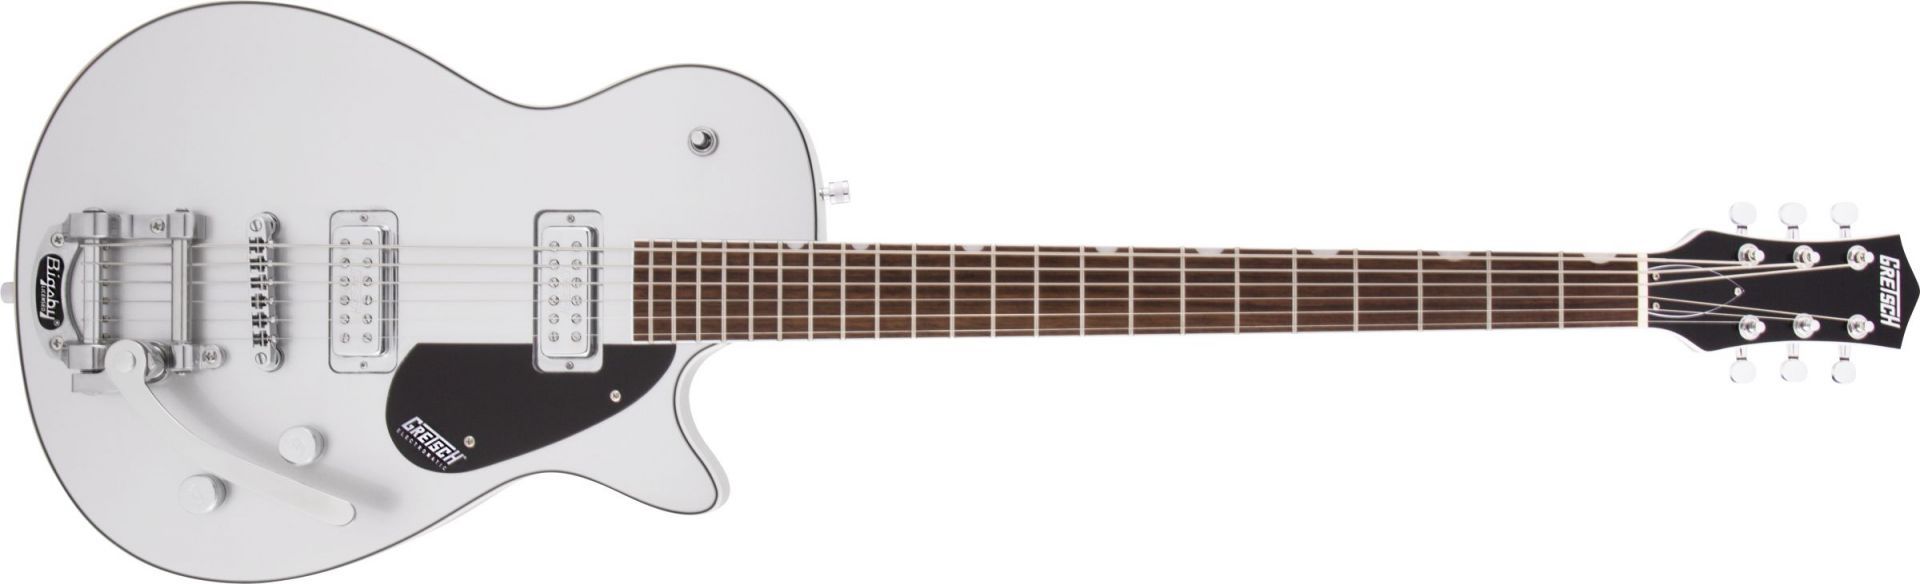 Gretsch Guitars G5260T Electromatic Jet Baritone with Bigsby Airline Silver